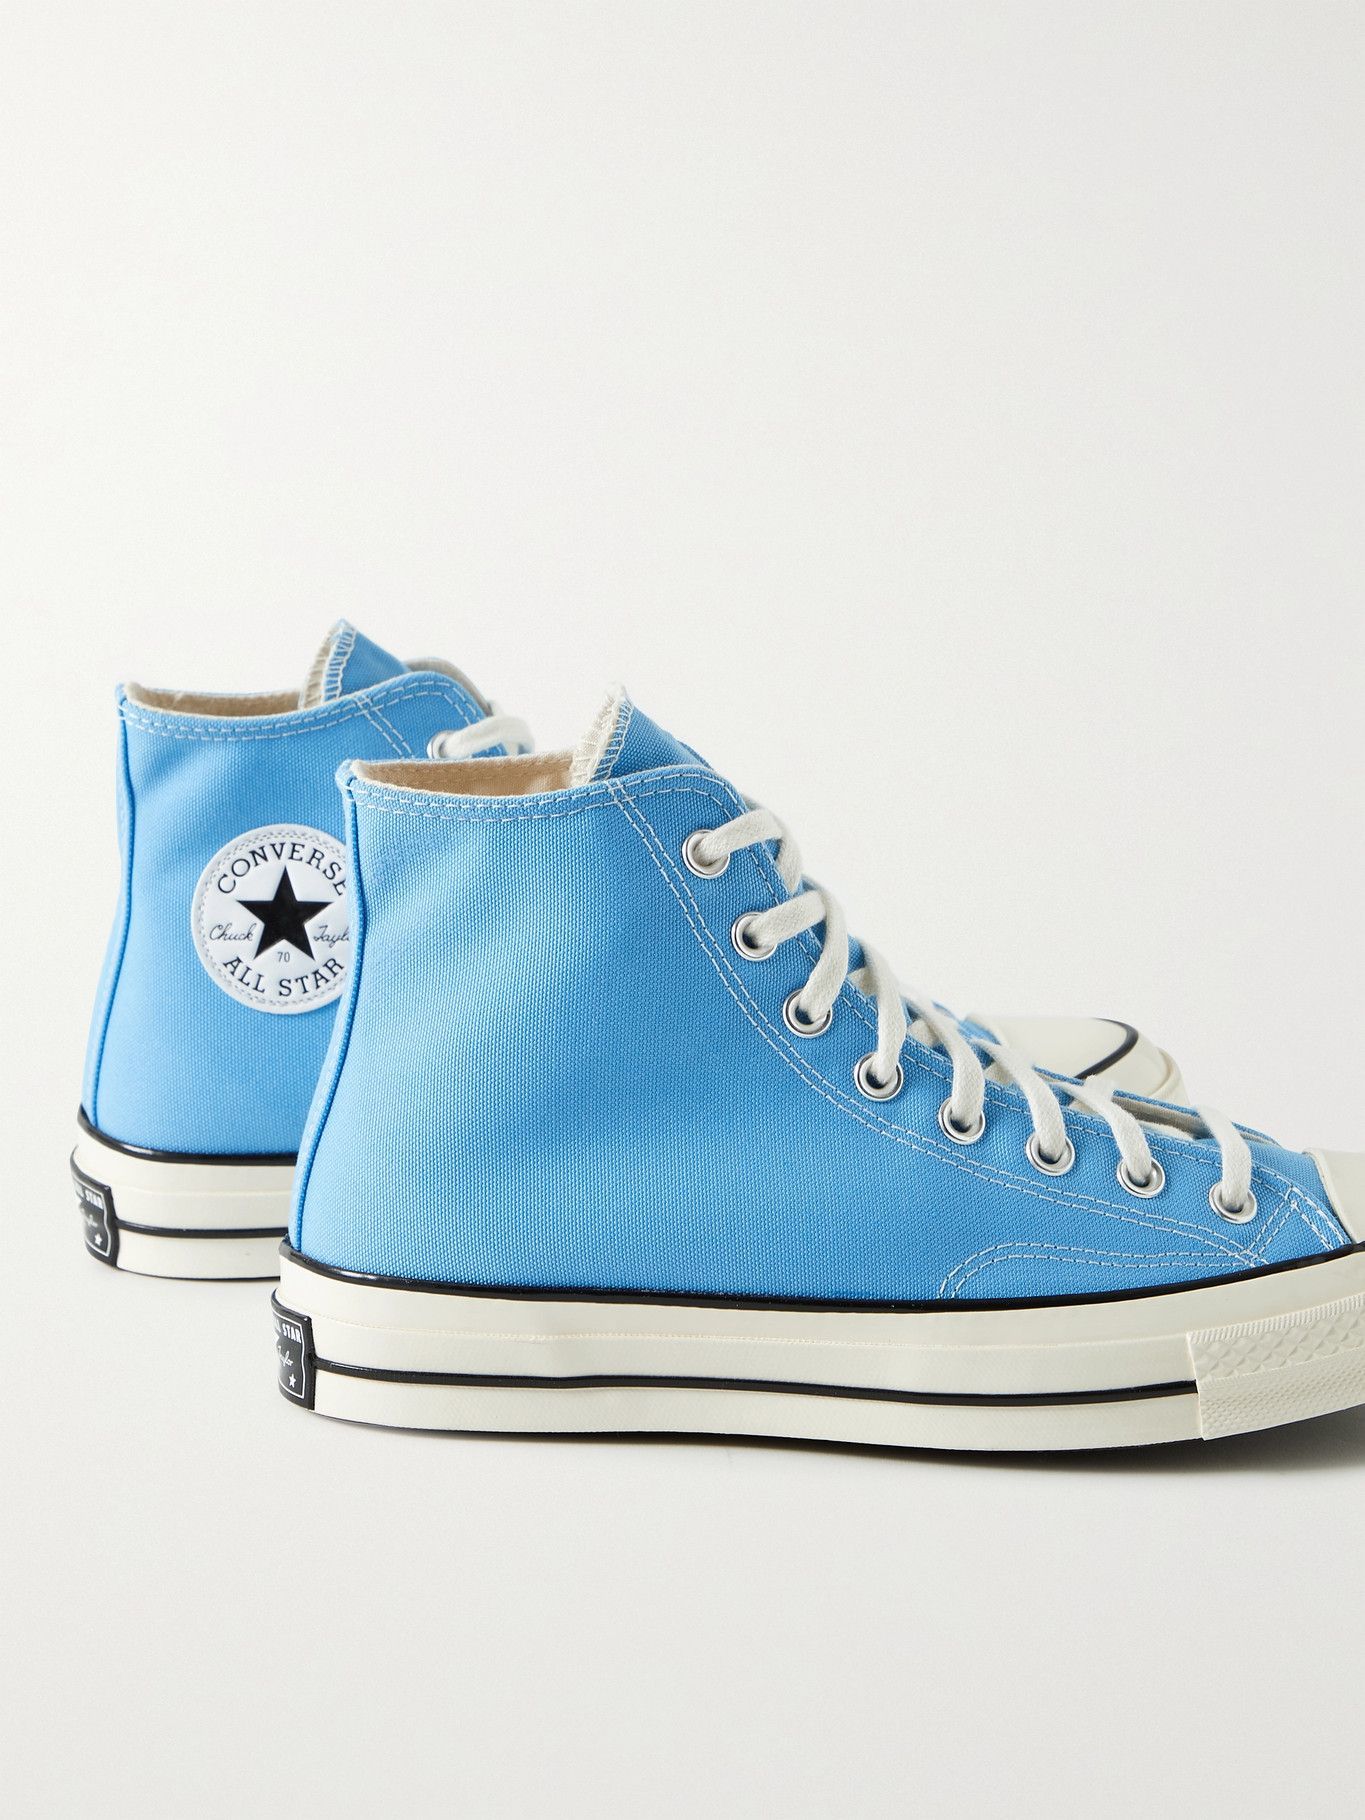 Converse - Chuck 70 Recycled Canvas High-Top Sneakers - Blue Converse